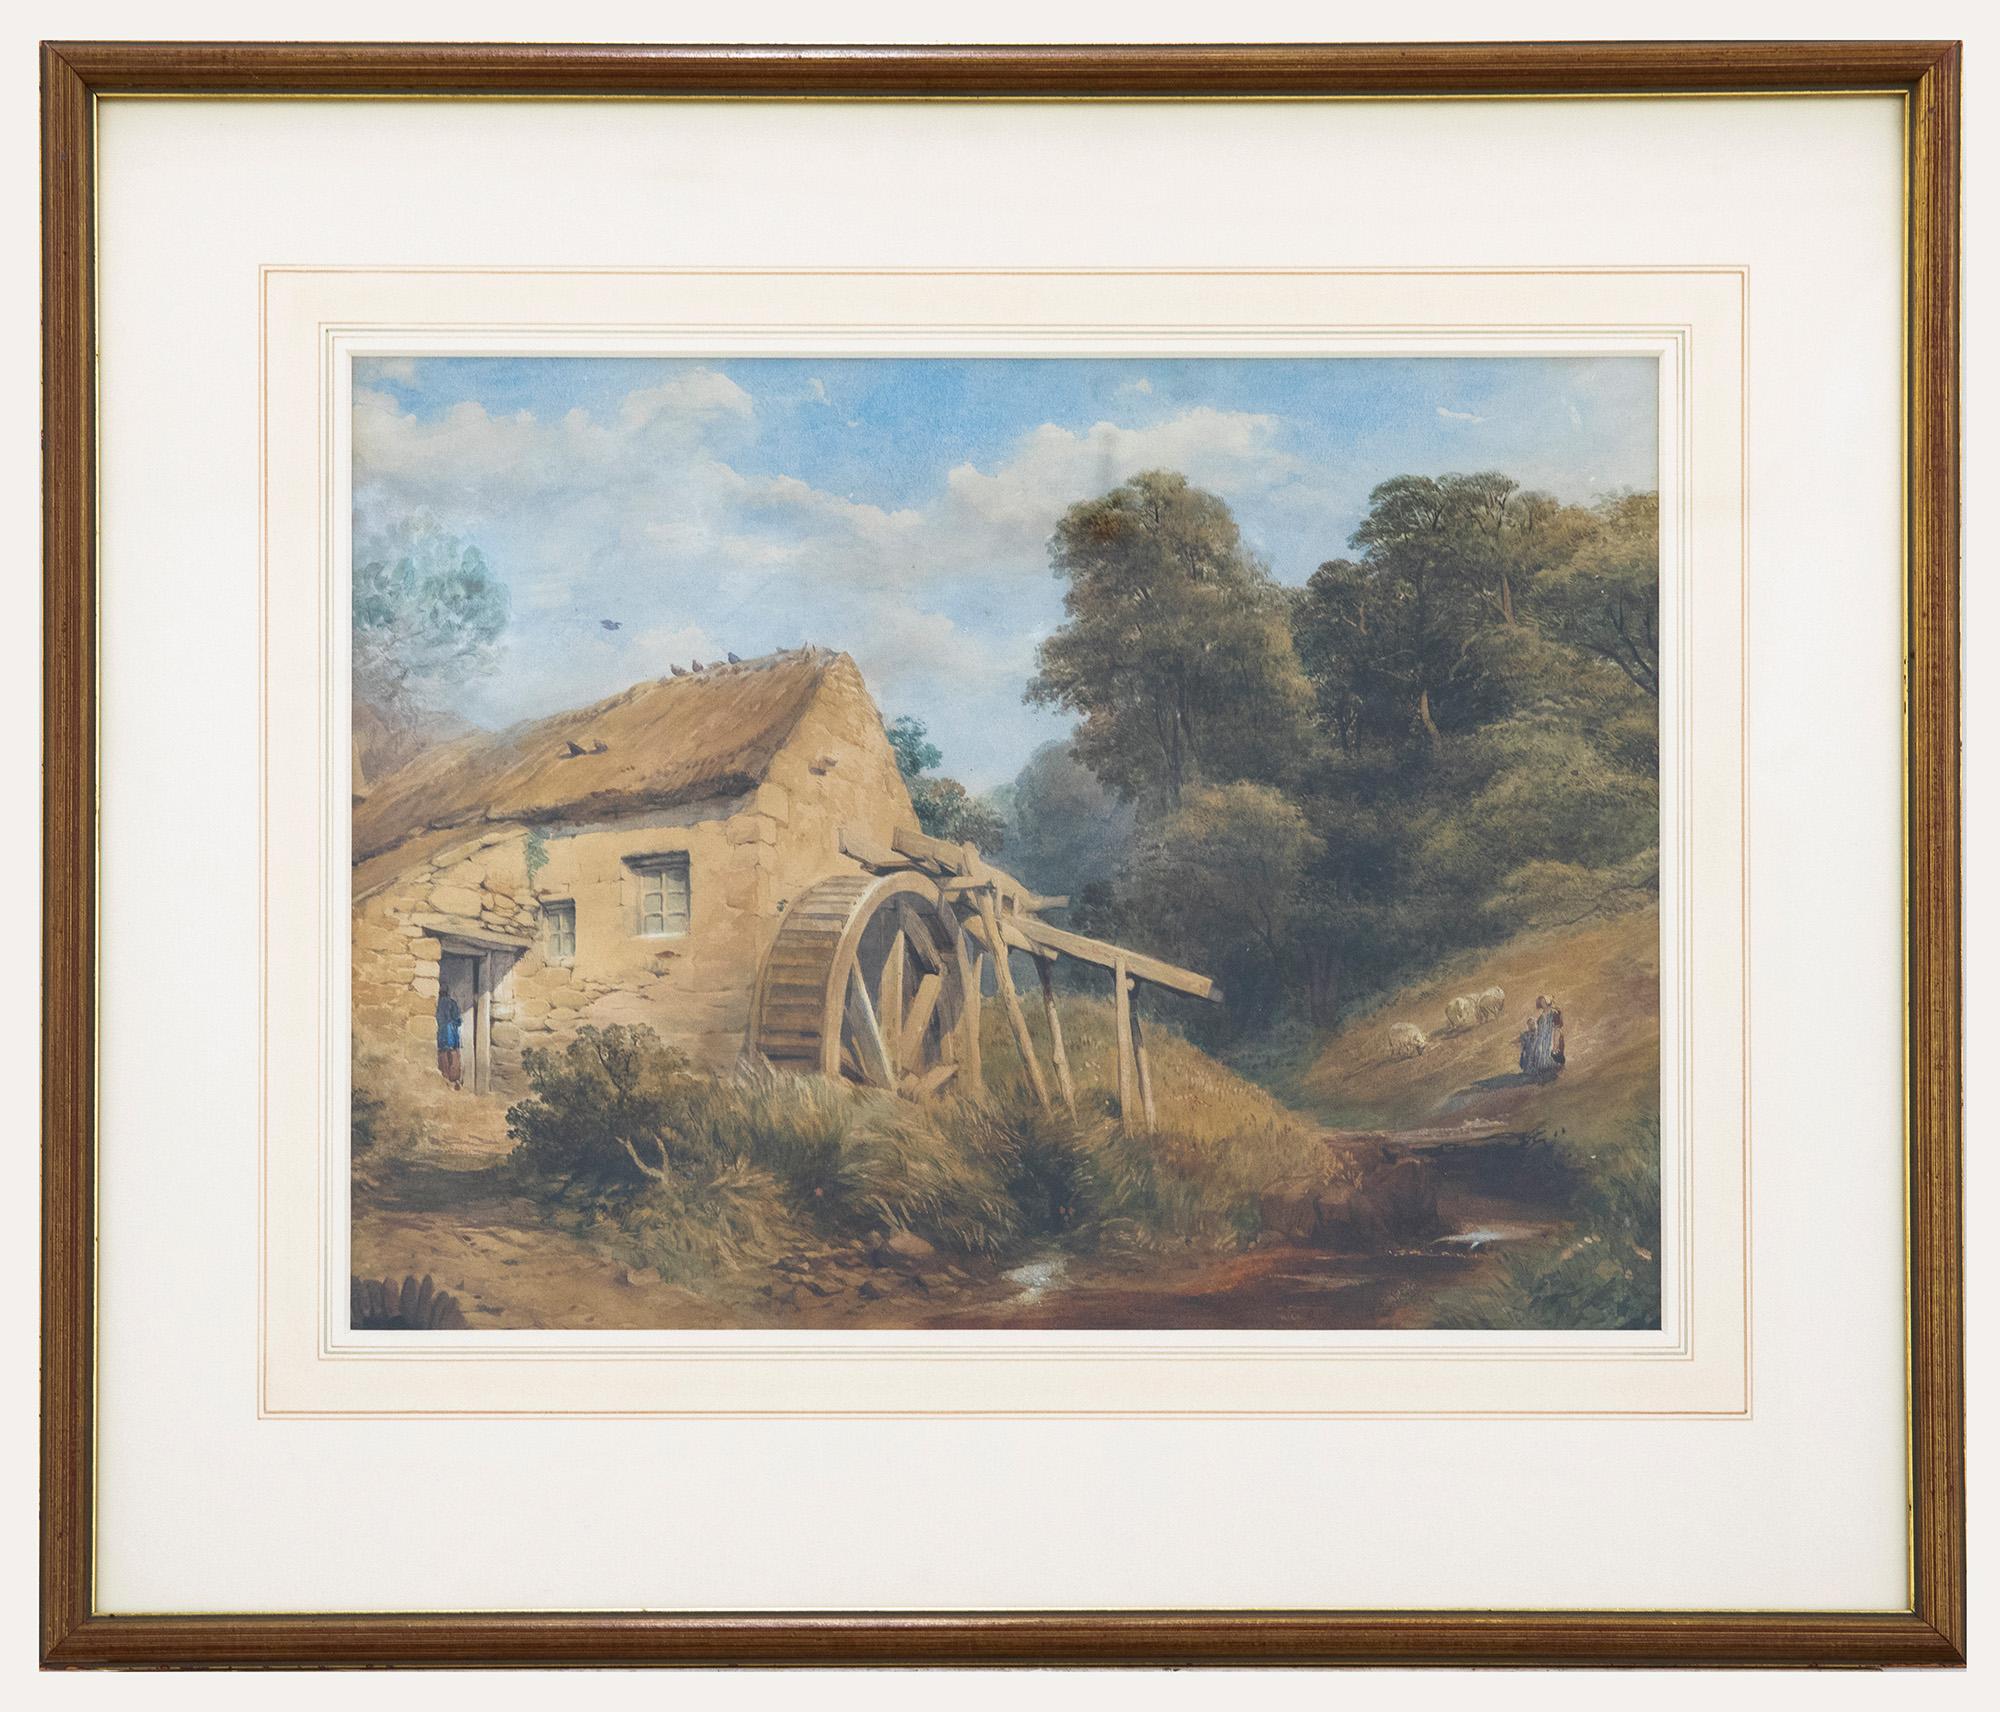 Unknown Landscape Art - Mid 19th Century Watercolour, An Overshot Mill